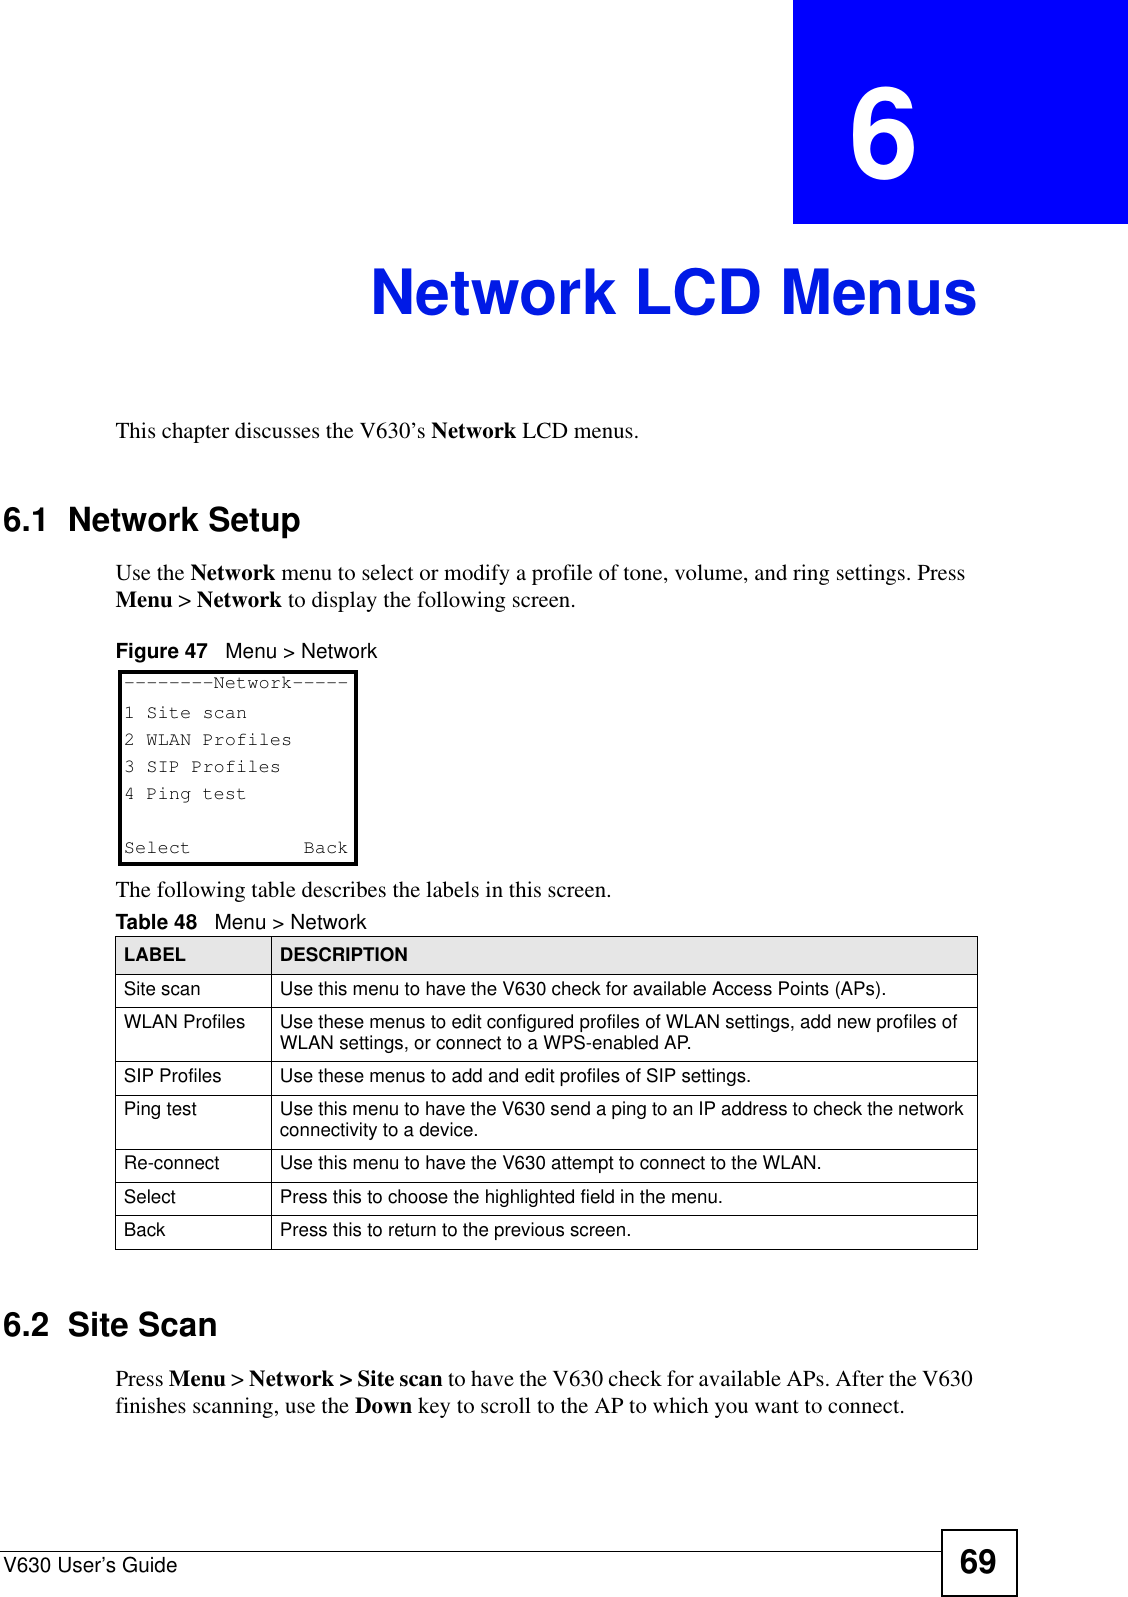 V630 User’s Guide 69CHAPTER  6 Network LCD MenusThis chapter discusses the V630’s Network LCD menus.6.1  Network SetupUse the Network menu to select or modify a profile of tone, volume, and ring settings. Press Menu &gt; Network to display the following screen.Figure 47   Menu &gt; NetworkThe following table describes the labels in this screen.6.2  Site ScanPress Menu &gt; Network &gt; Site scan to have the V630 check for available APs. After the V630 finishes scanning, use the Down key to scroll to the AP to which you want to connect. Table 48   Menu &gt; NetworkLABEL DESCRIPTIONSite scan Use this menu to have the V630 check for available Access Points (APs).WLAN Profiles Use these menus to edit configured profiles of WLAN settings, add new profiles of WLAN settings, or connect to a WPS-enabled AP.SIP Profiles Use these menus to add and edit profiles of SIP settings.Ping test Use this menu to have the V630 send a ping to an IP address to check the network connectivity to a device.Re-connect Use this menu to have the V630 attempt to connect to the WLAN.Select Press this to choose the highlighted field in the menu.Back Press this to return to the previous screen.--------Network-----1 Site scan2 WLAN Profiles3 SIP Profiles4 Ping testSelect   Back